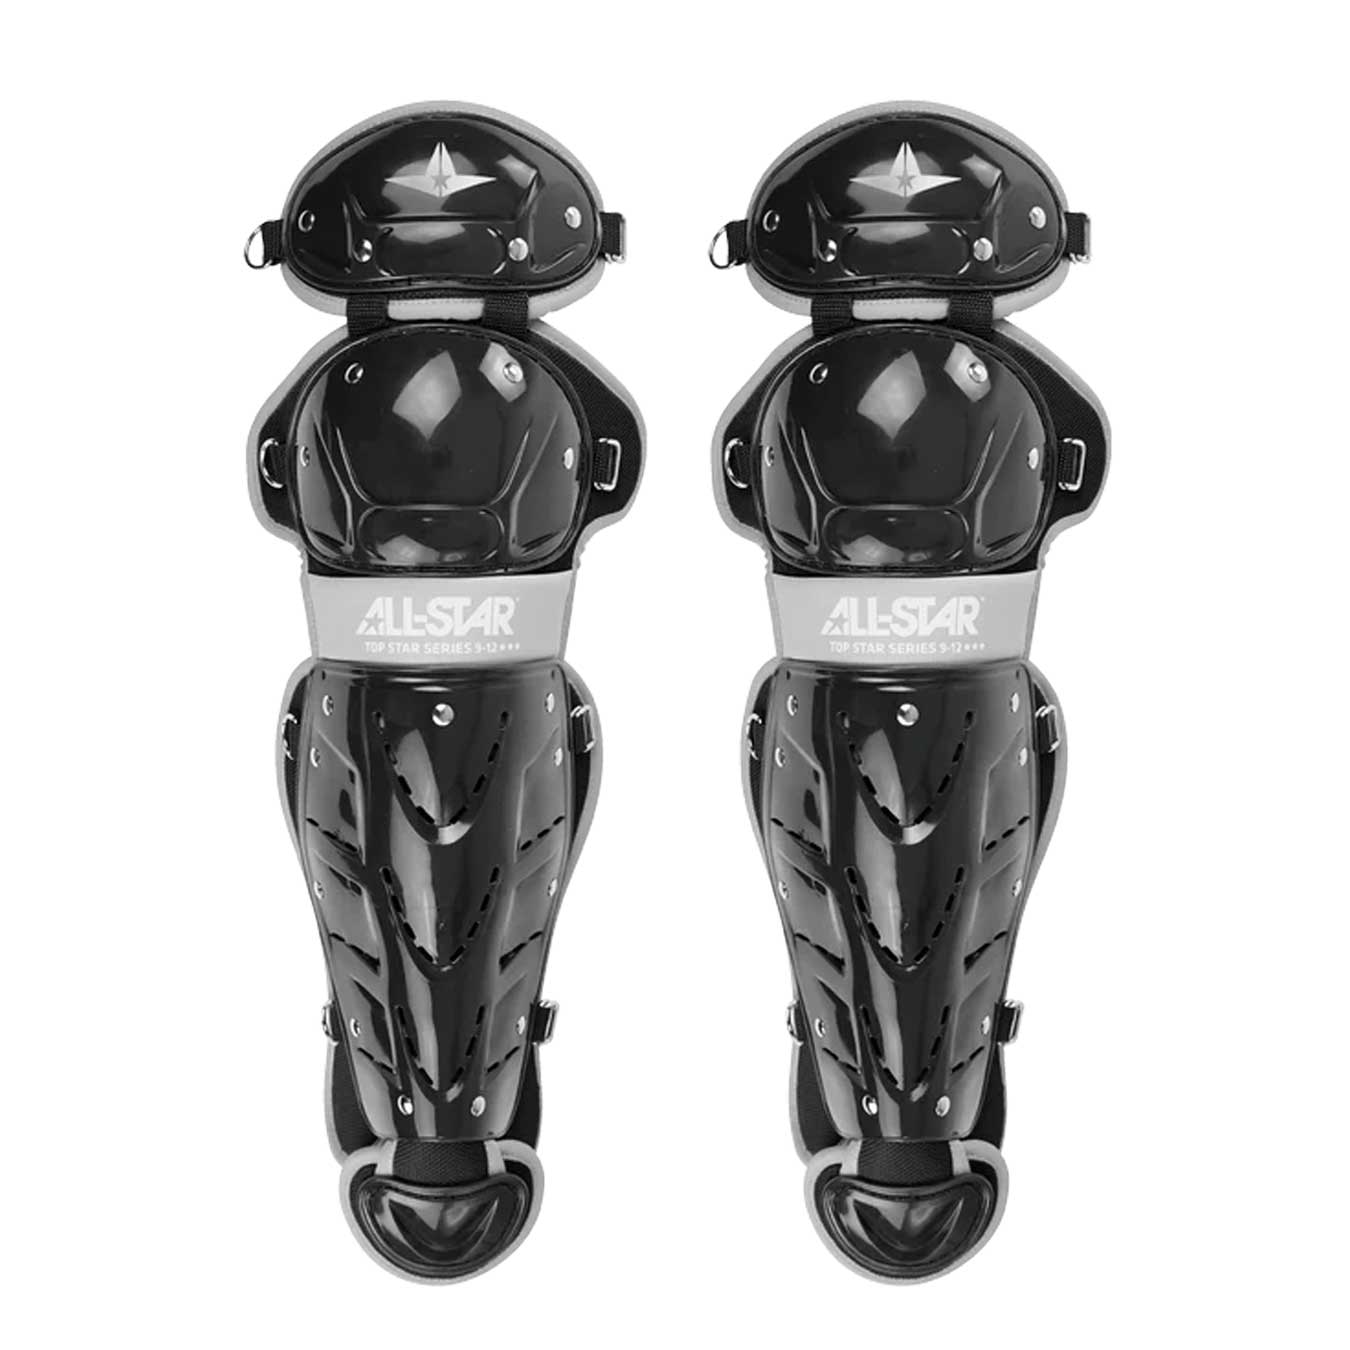 All-Star Top Star Leg Guards LG-TS-1216 Ages 12-16 15"